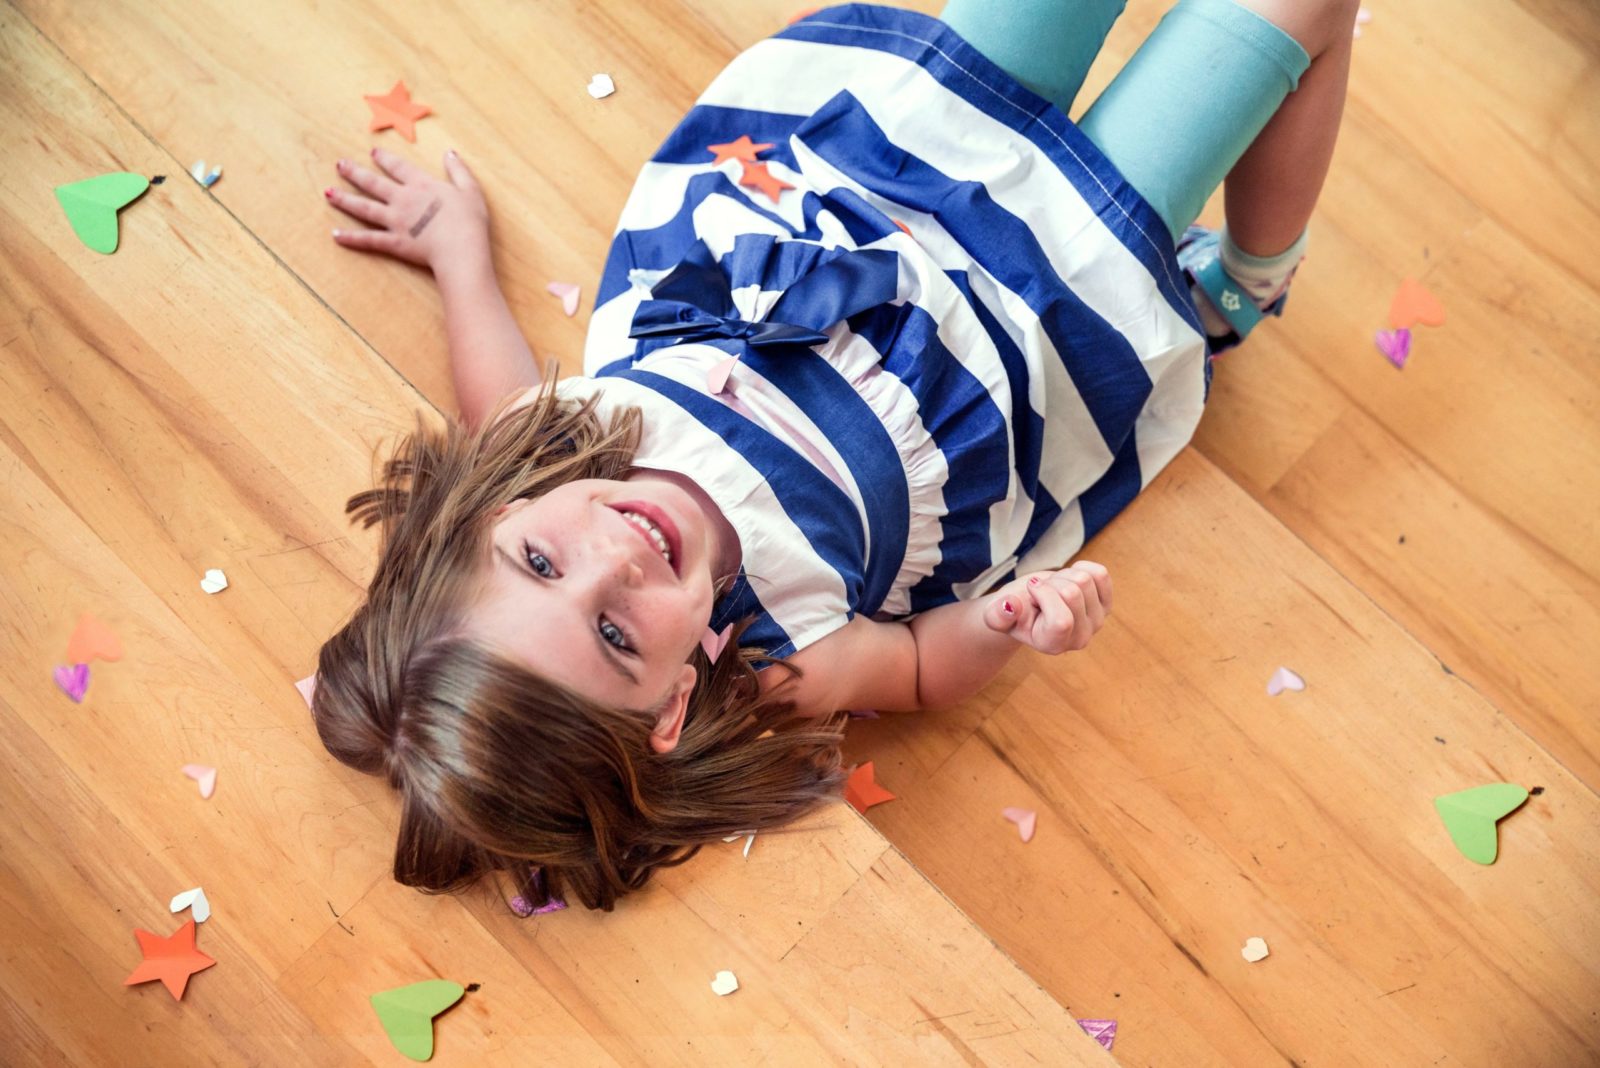 Smiling child laying on timber floor